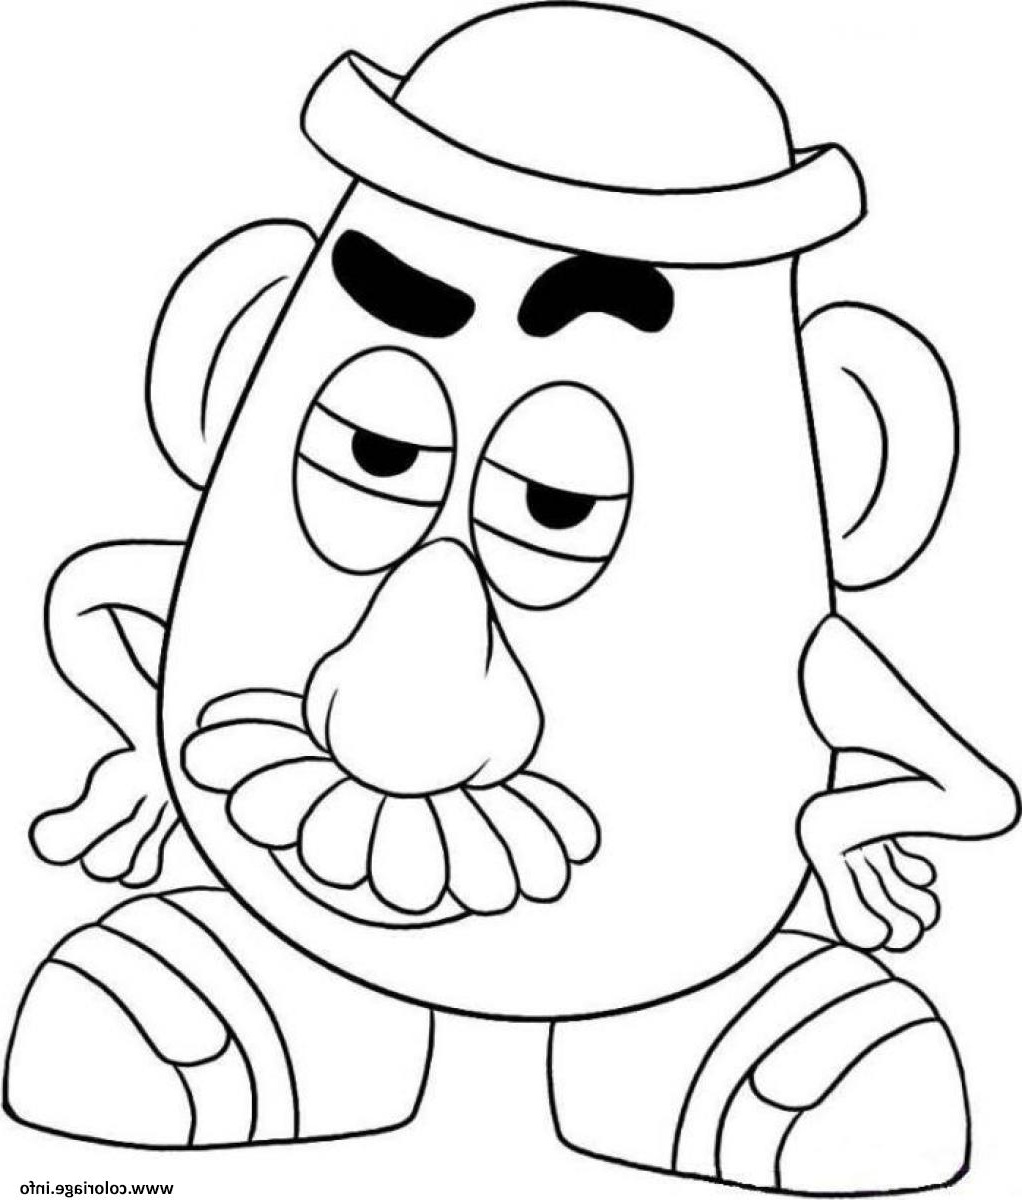 Coloriage Monsieur Patate Inspirant Image Coloriage Monsieur Patate toy Story Jecolorie